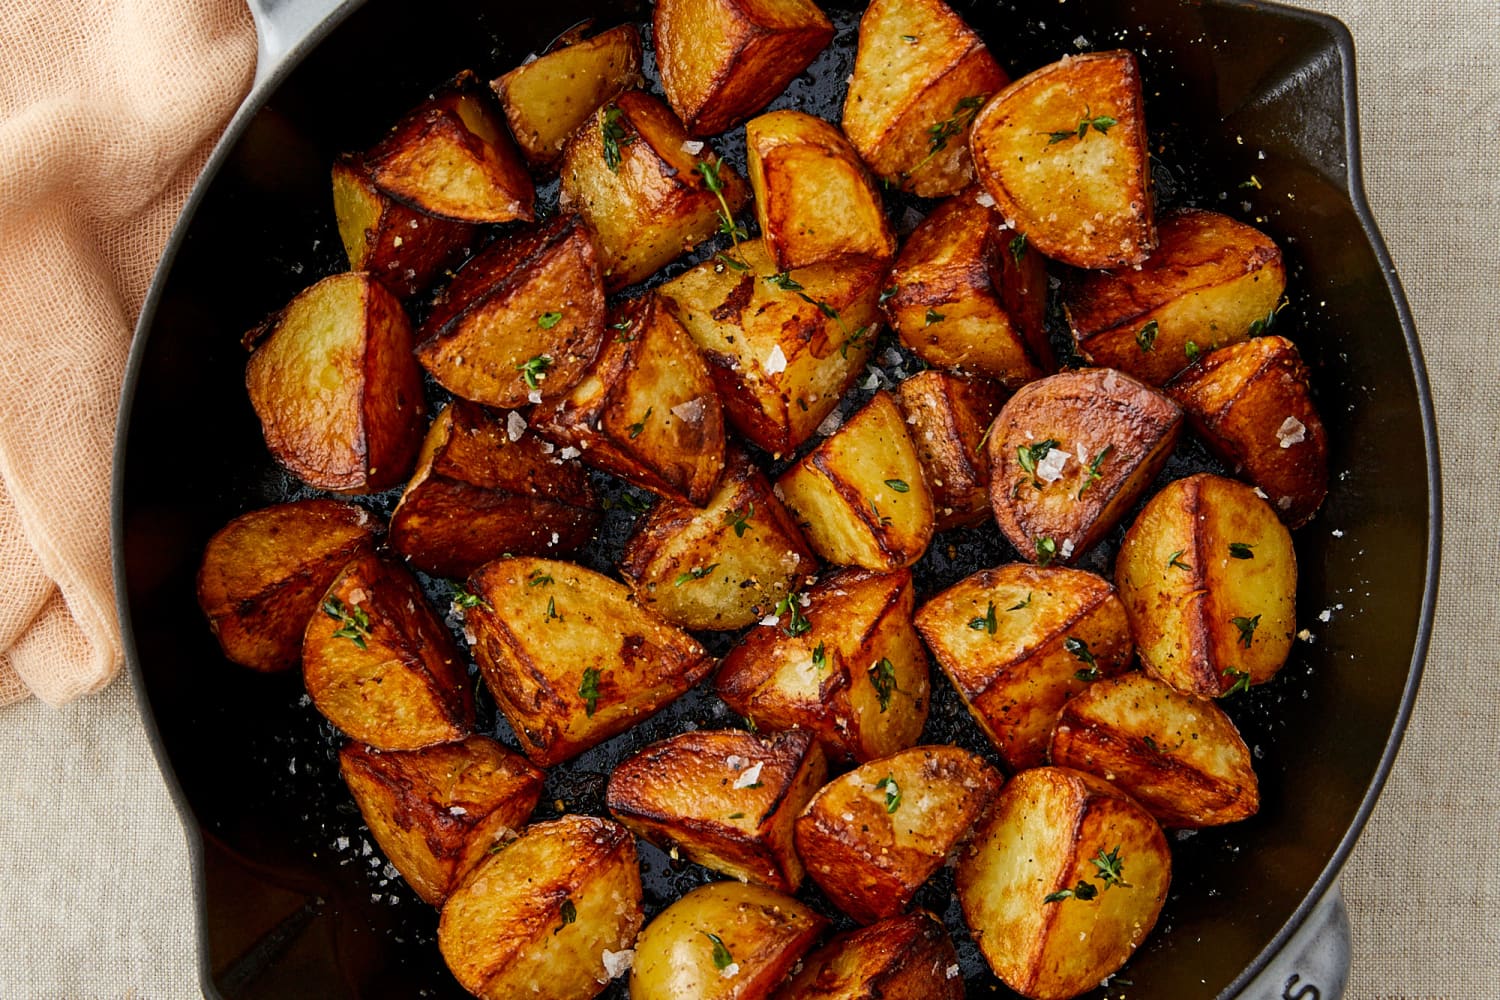 Crispy Skillet-Fried Potatoes Recipe (No Baking or Boiling) | The Kitchn